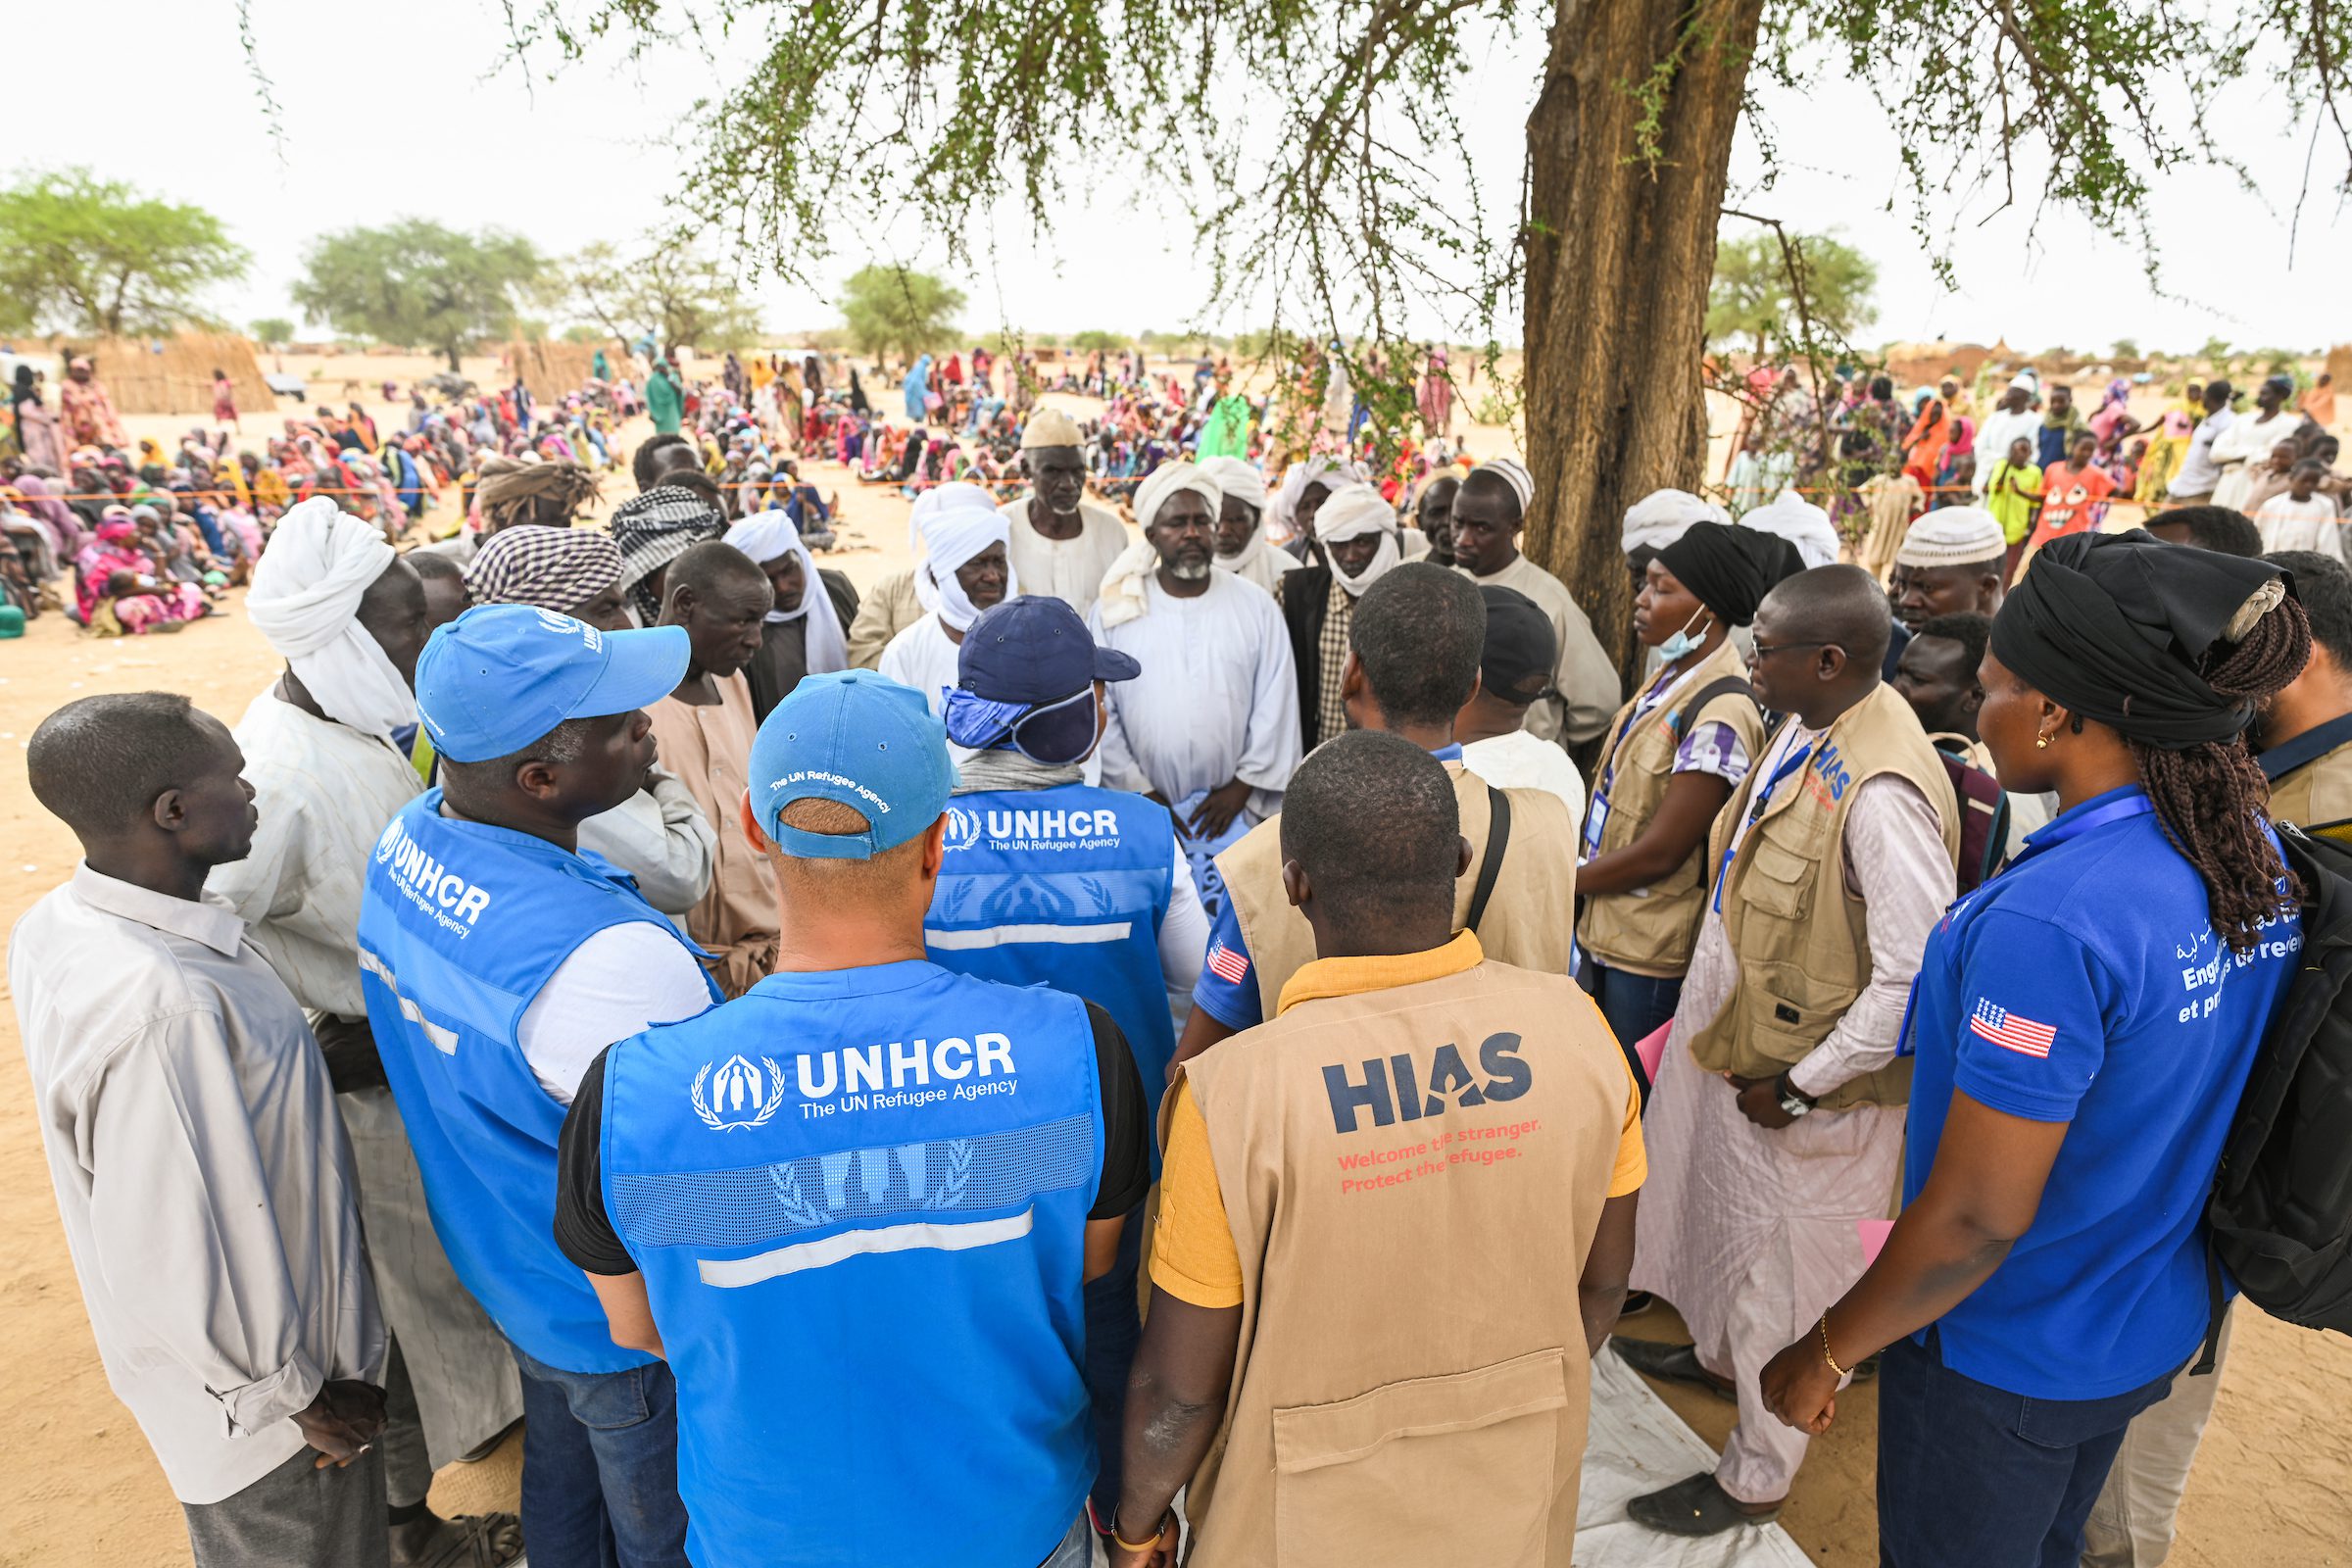 Aid workers talking to Sudanese refugee leaders outside under a tree